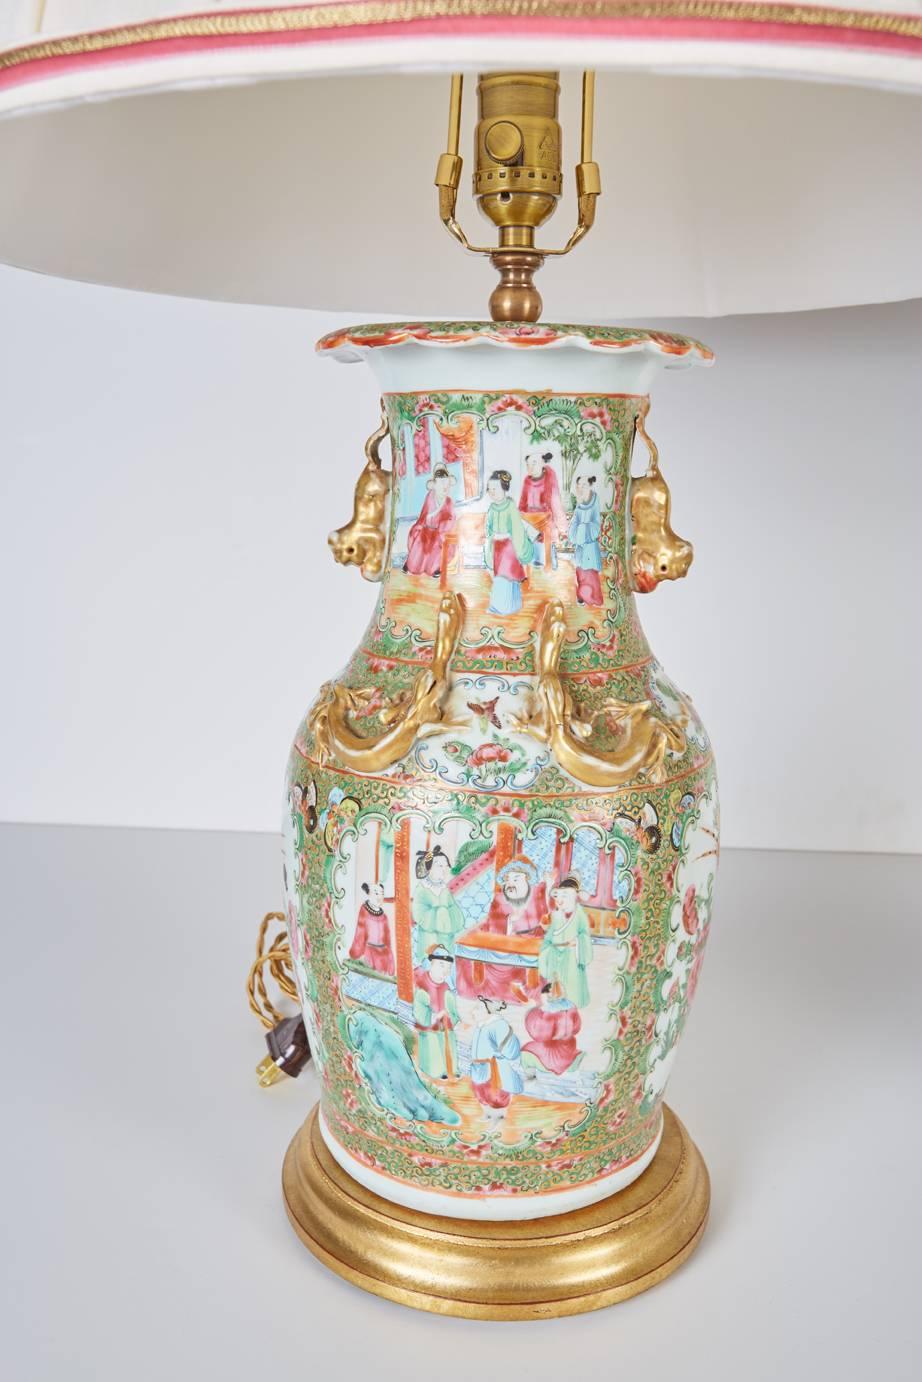 Pair Antique Chinese Export Rose Mandarin Vases now mounted as lamps on custom gilt wood bases and with custom hand smocked cream colored silk shades trimmed in pink ribbon and antique metallic gold colored tape.